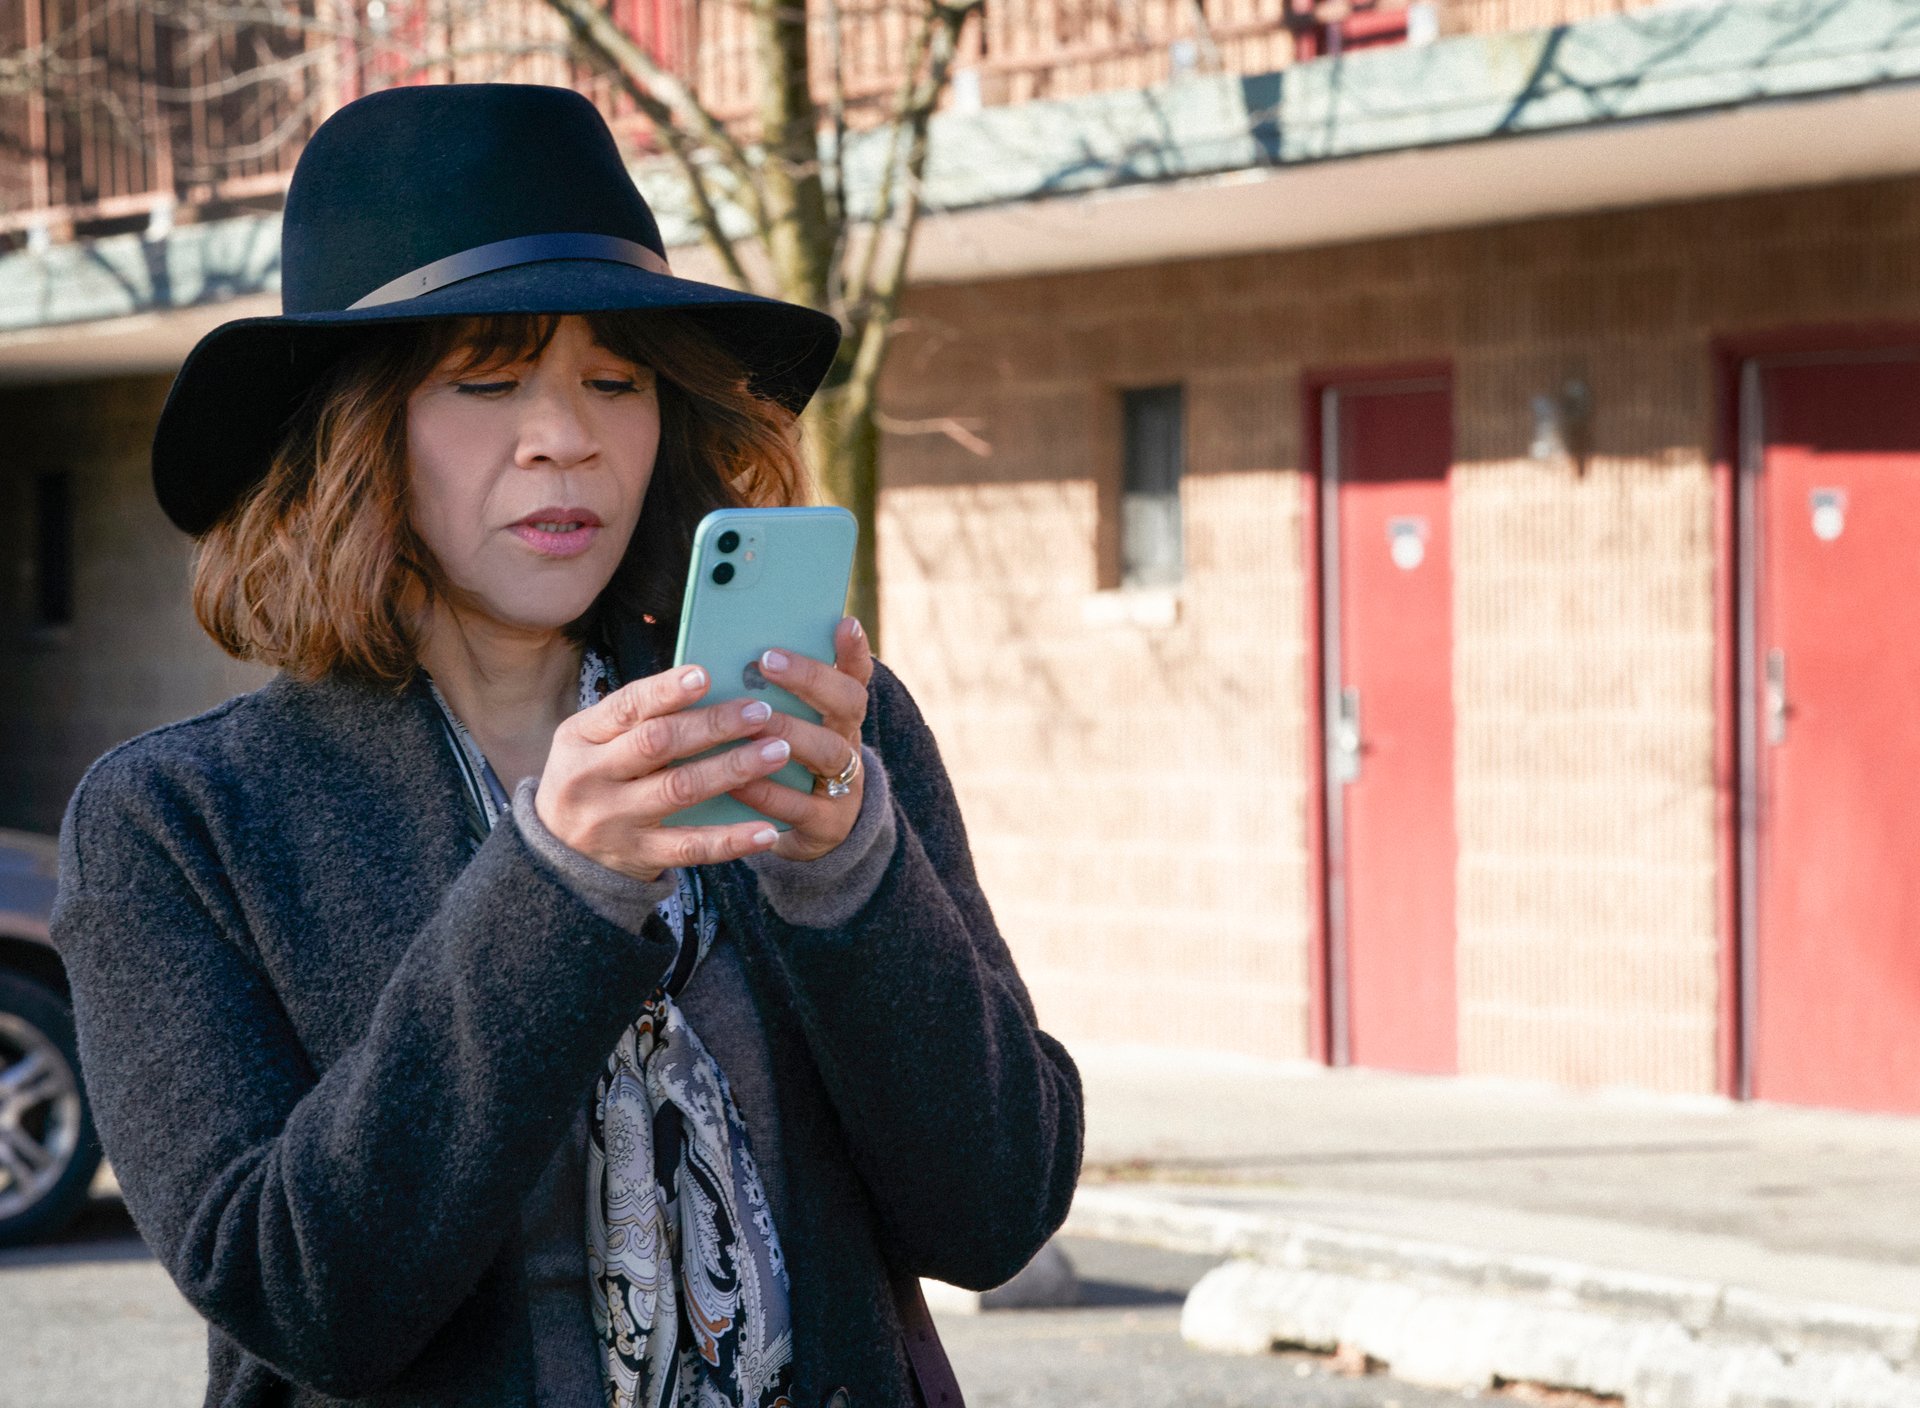 Rosie Perez as Megan Briscoe in 'The Flight Attendant' on HBO Max. She's wearing a black hat and texting on her cellphone.